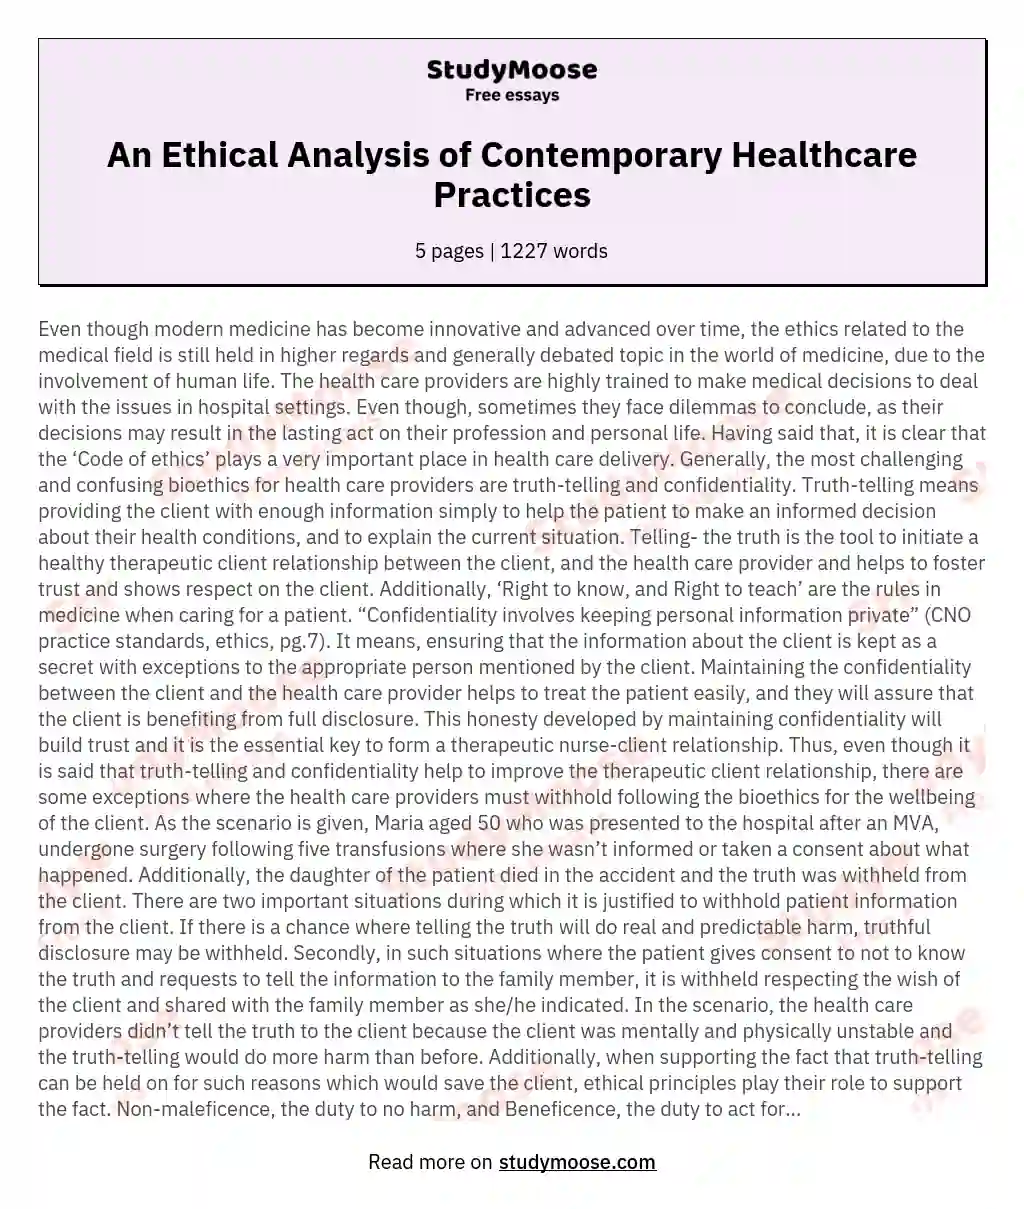 An Ethical Analysis of Contemporary Healthcare Practices essay